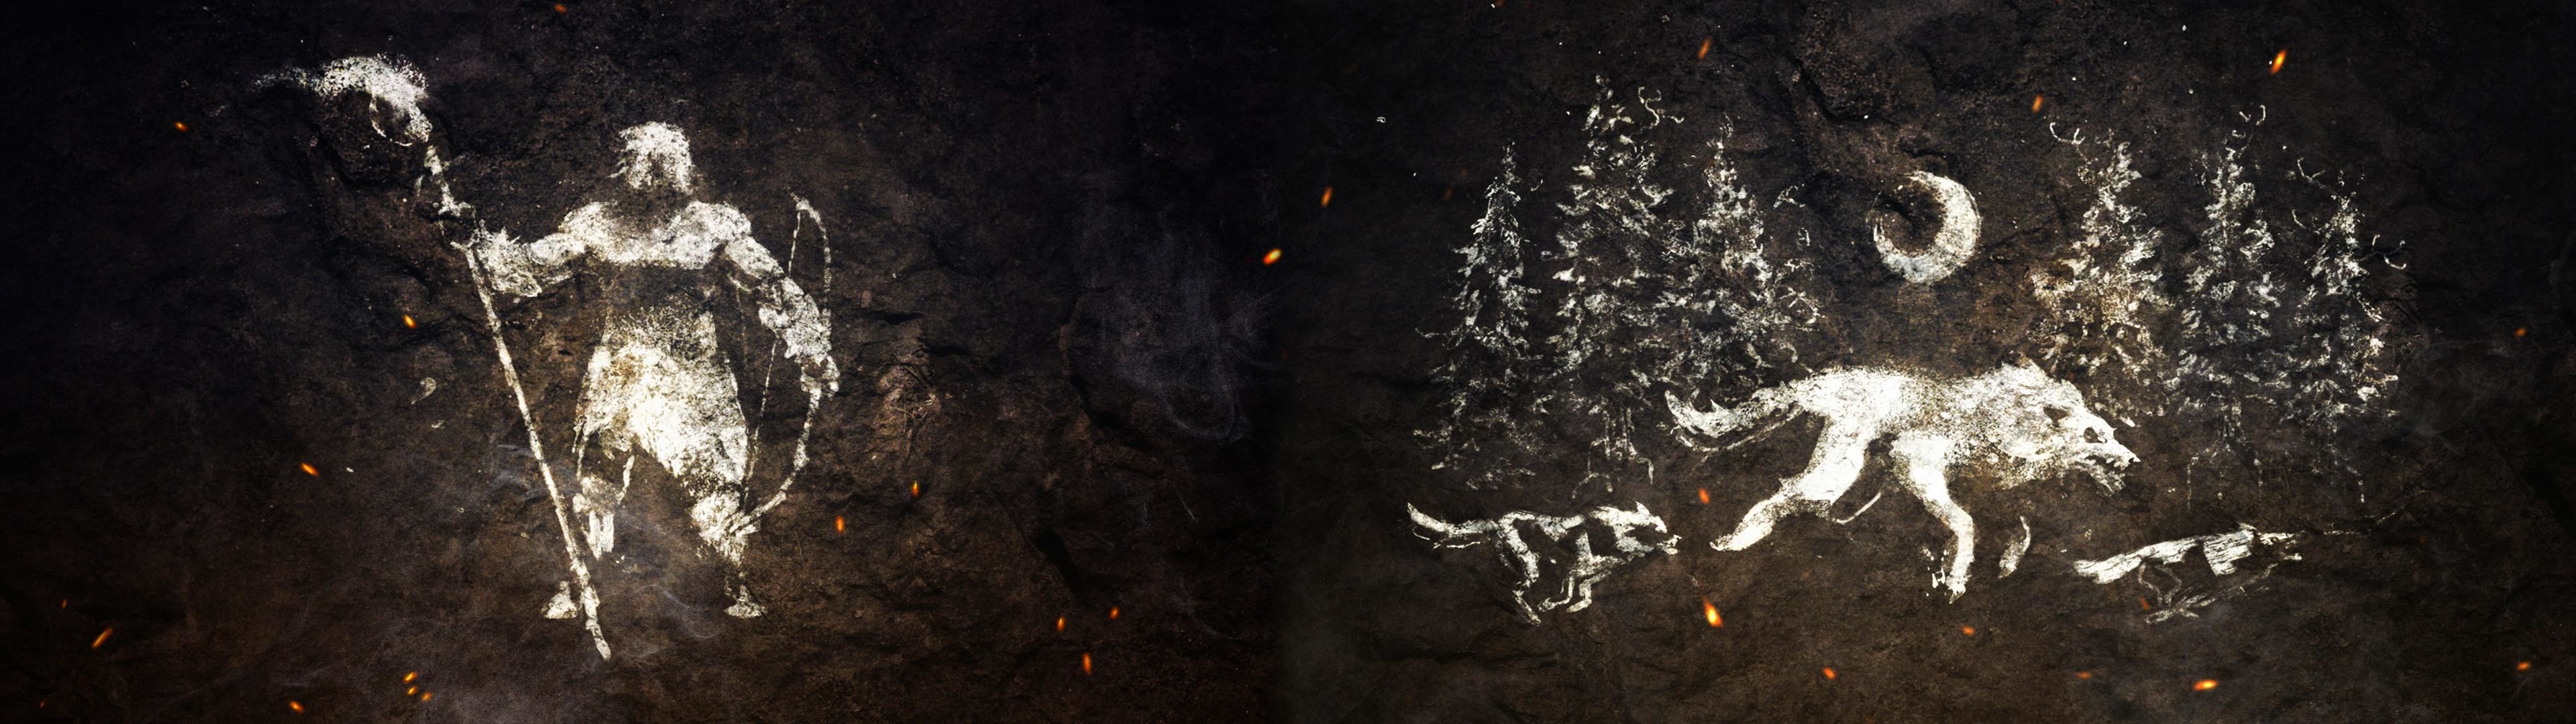 3840x1080 Made a FarCry: Primal Dual Monitor Wallpaper []